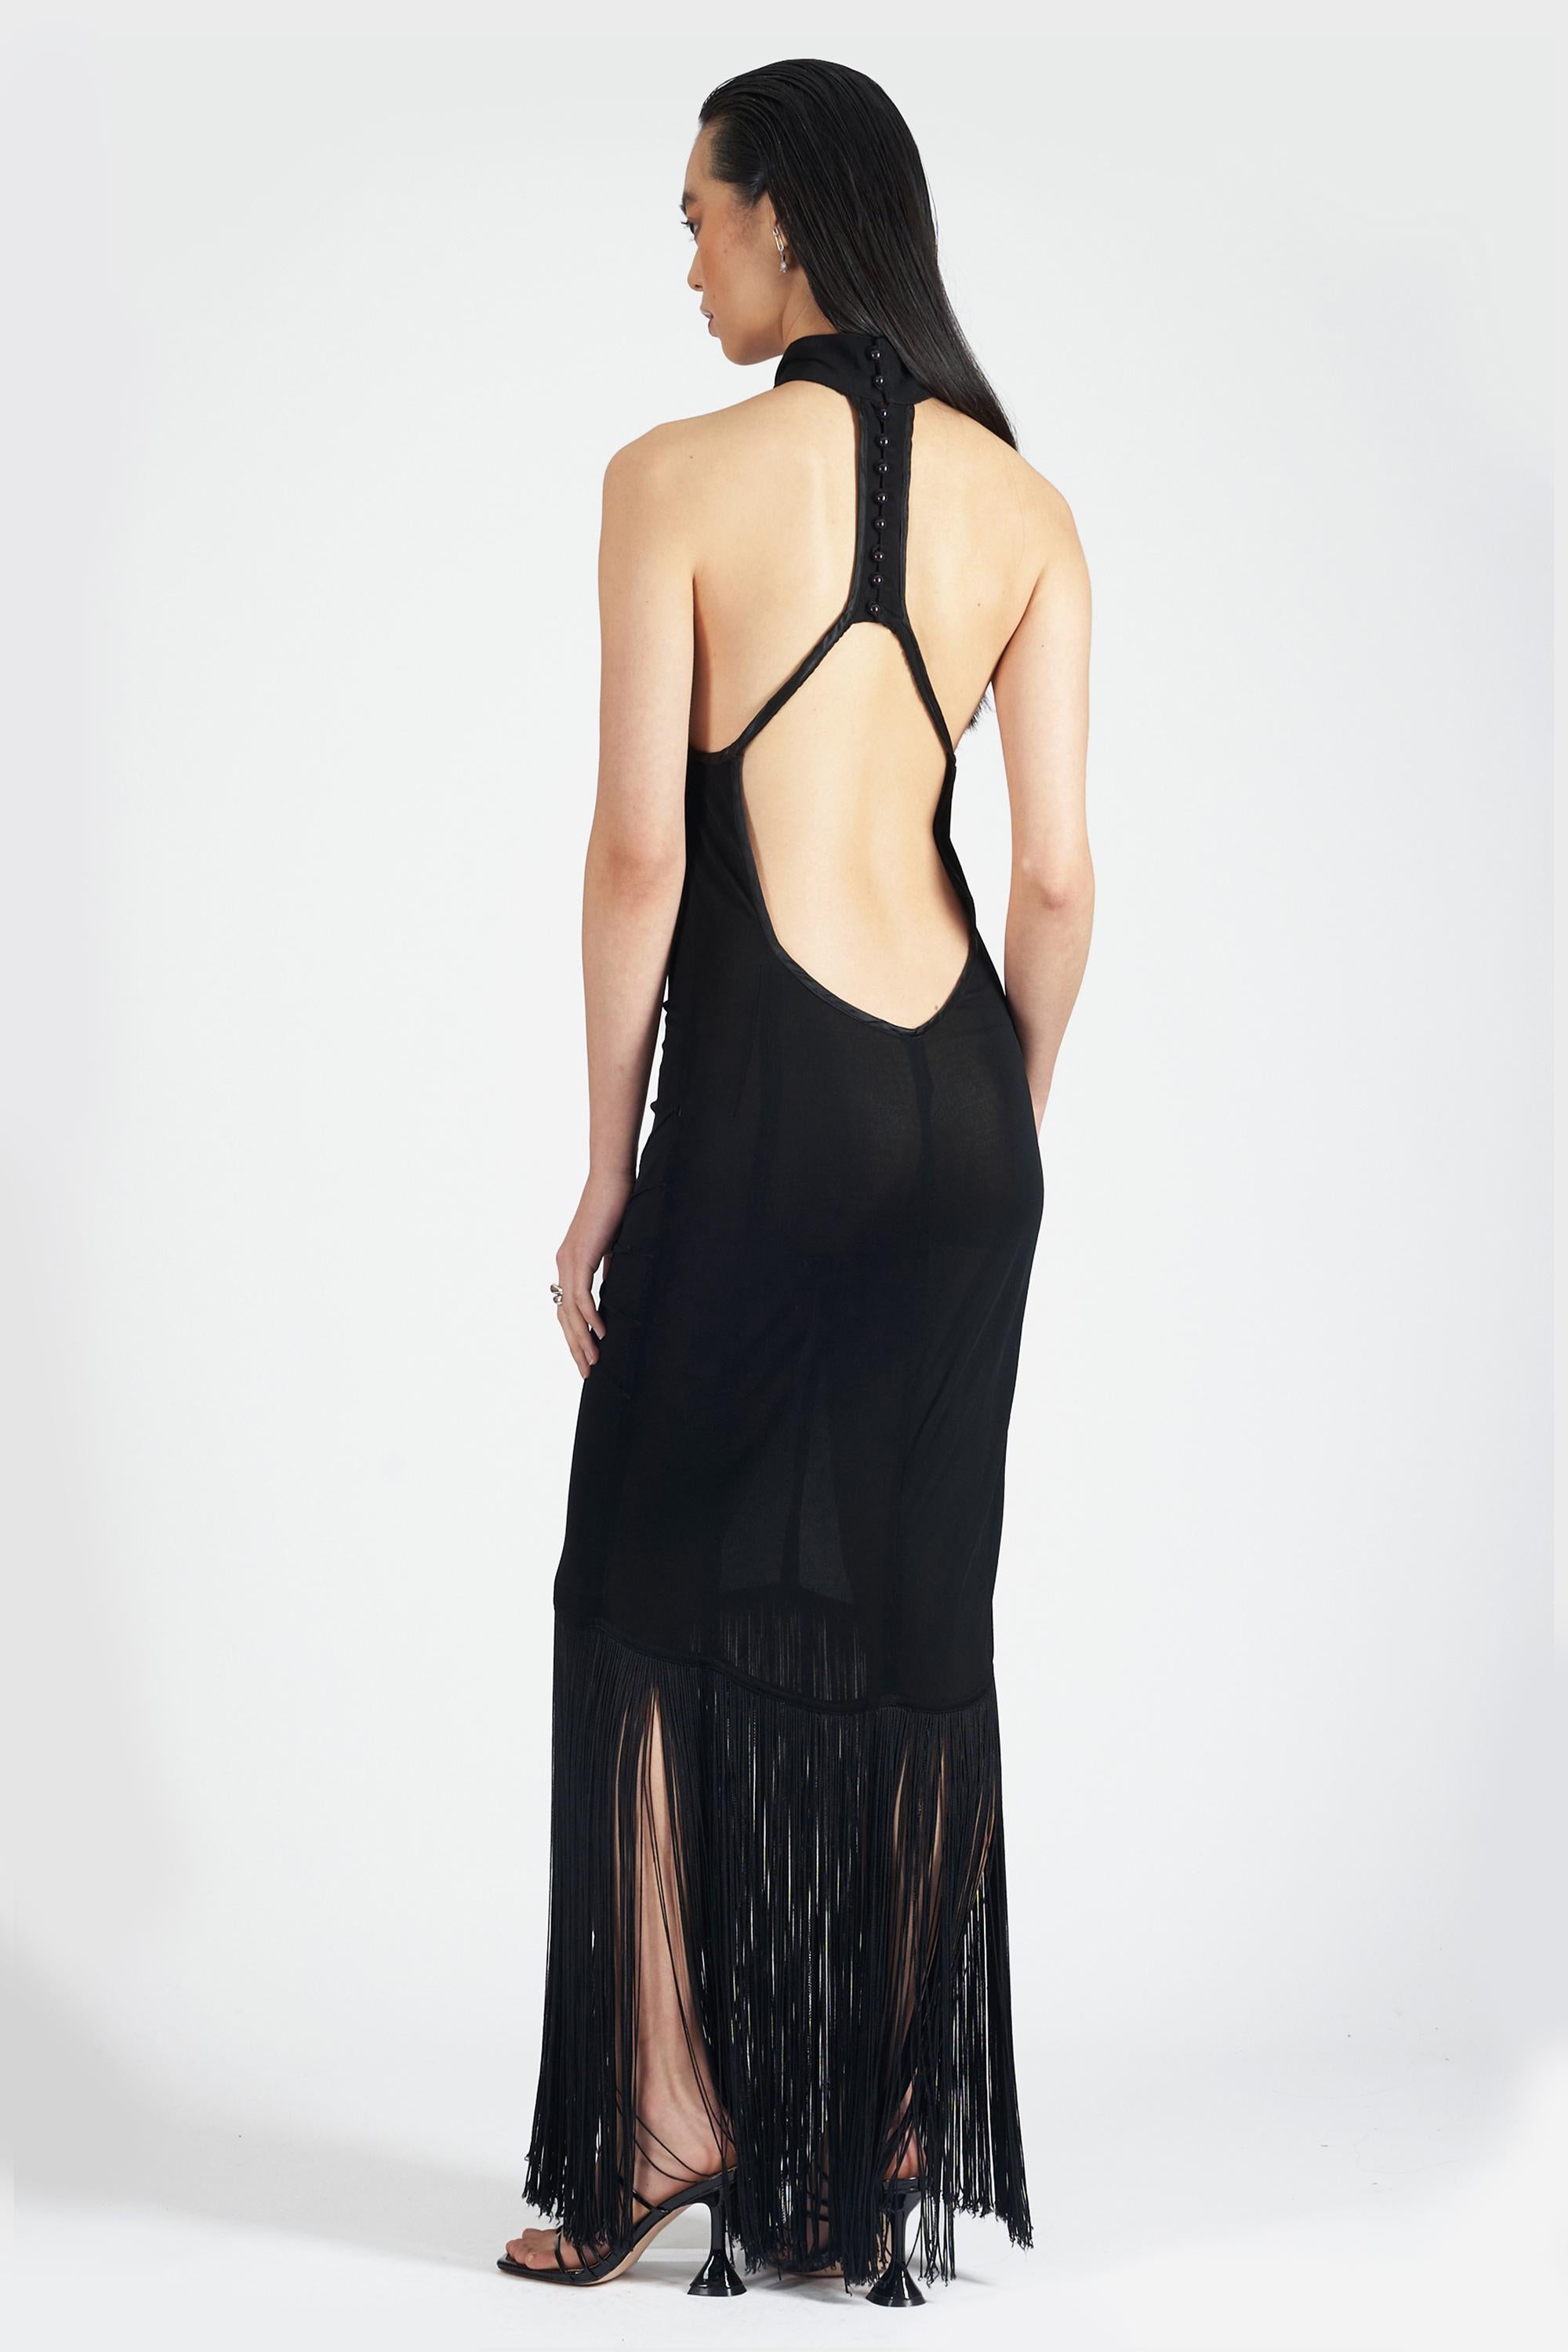 Nordic Poetry are excited to present this rare Thierry Mugler 1980’s black halter neck maxi dress. Features halter neckline, fringe detail, low cut and open back. In excellent vintage condition. Authenticity guaranteed.

Label size: 42 FR
Modern